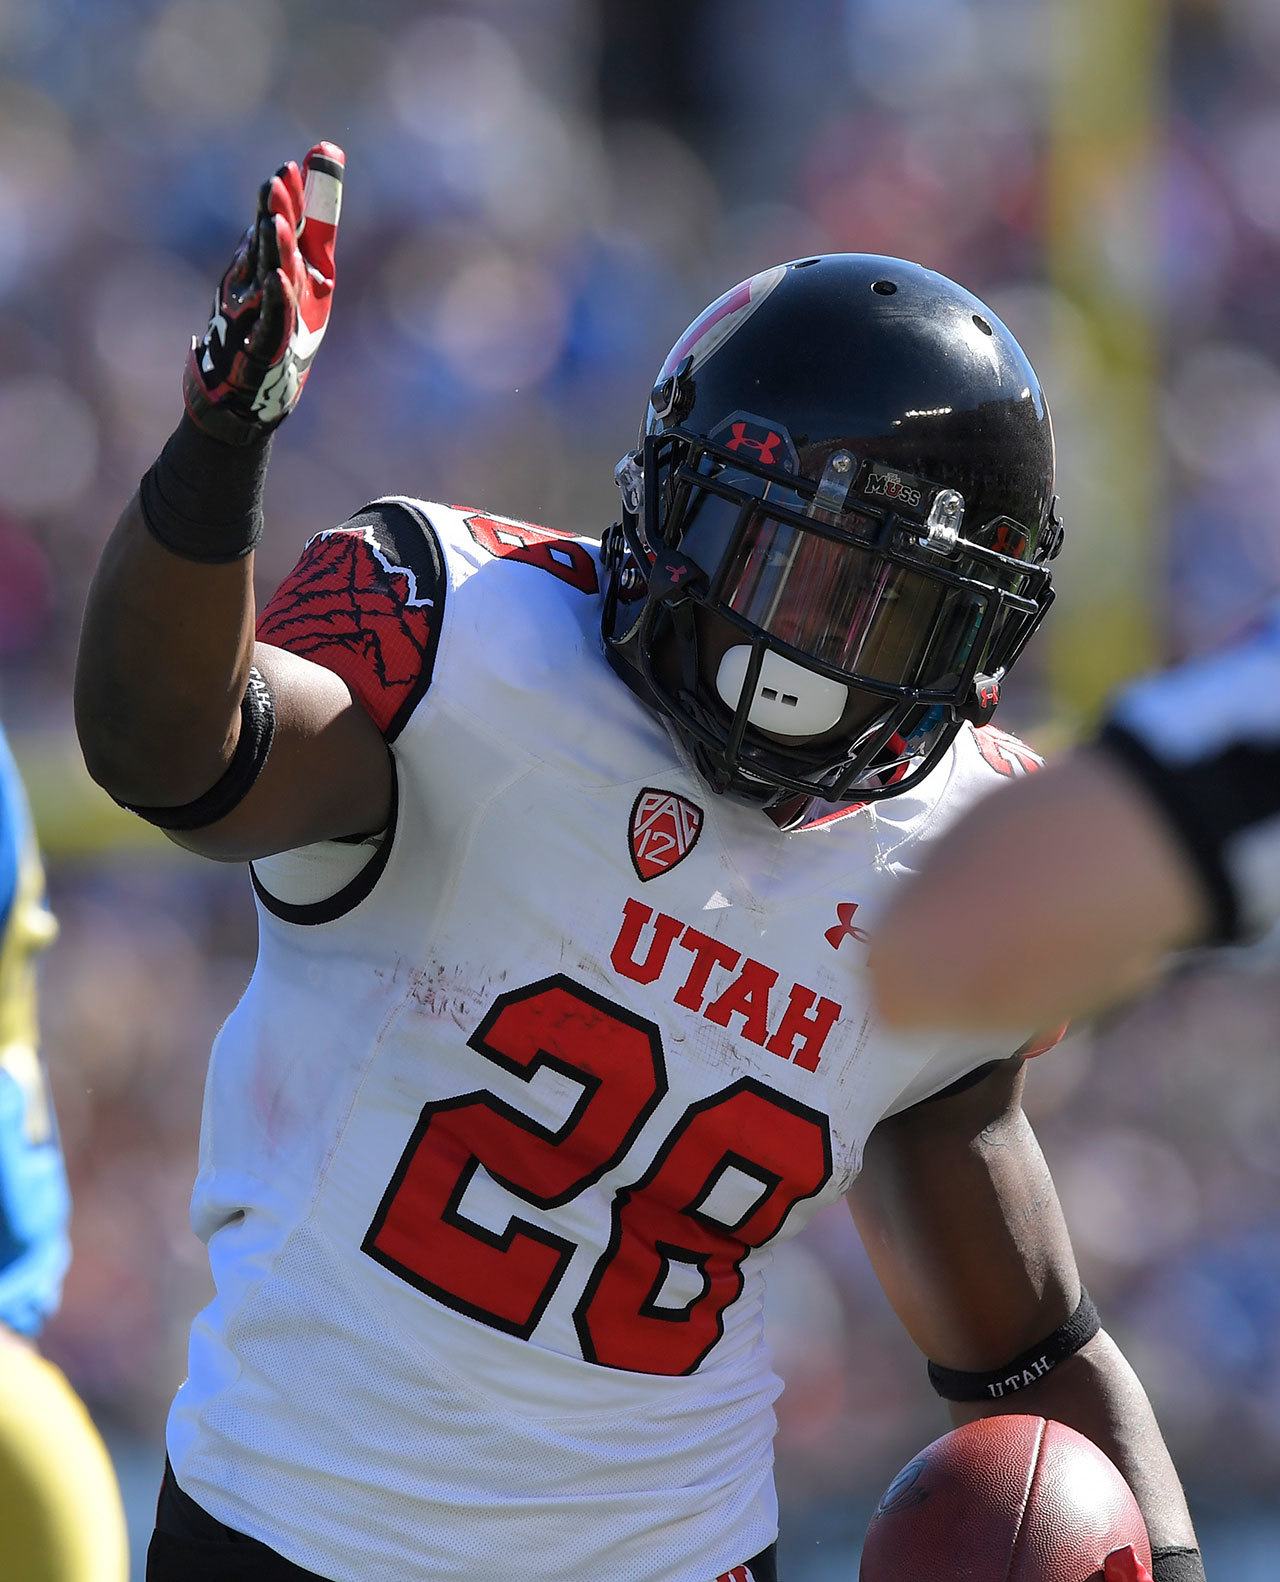 Utah running back Joe Williams celebrates after making a first down during the first half of a game against UCLA this past Saturday in Pasadena, Calif. (AP Photo/Mark J. Terrill)